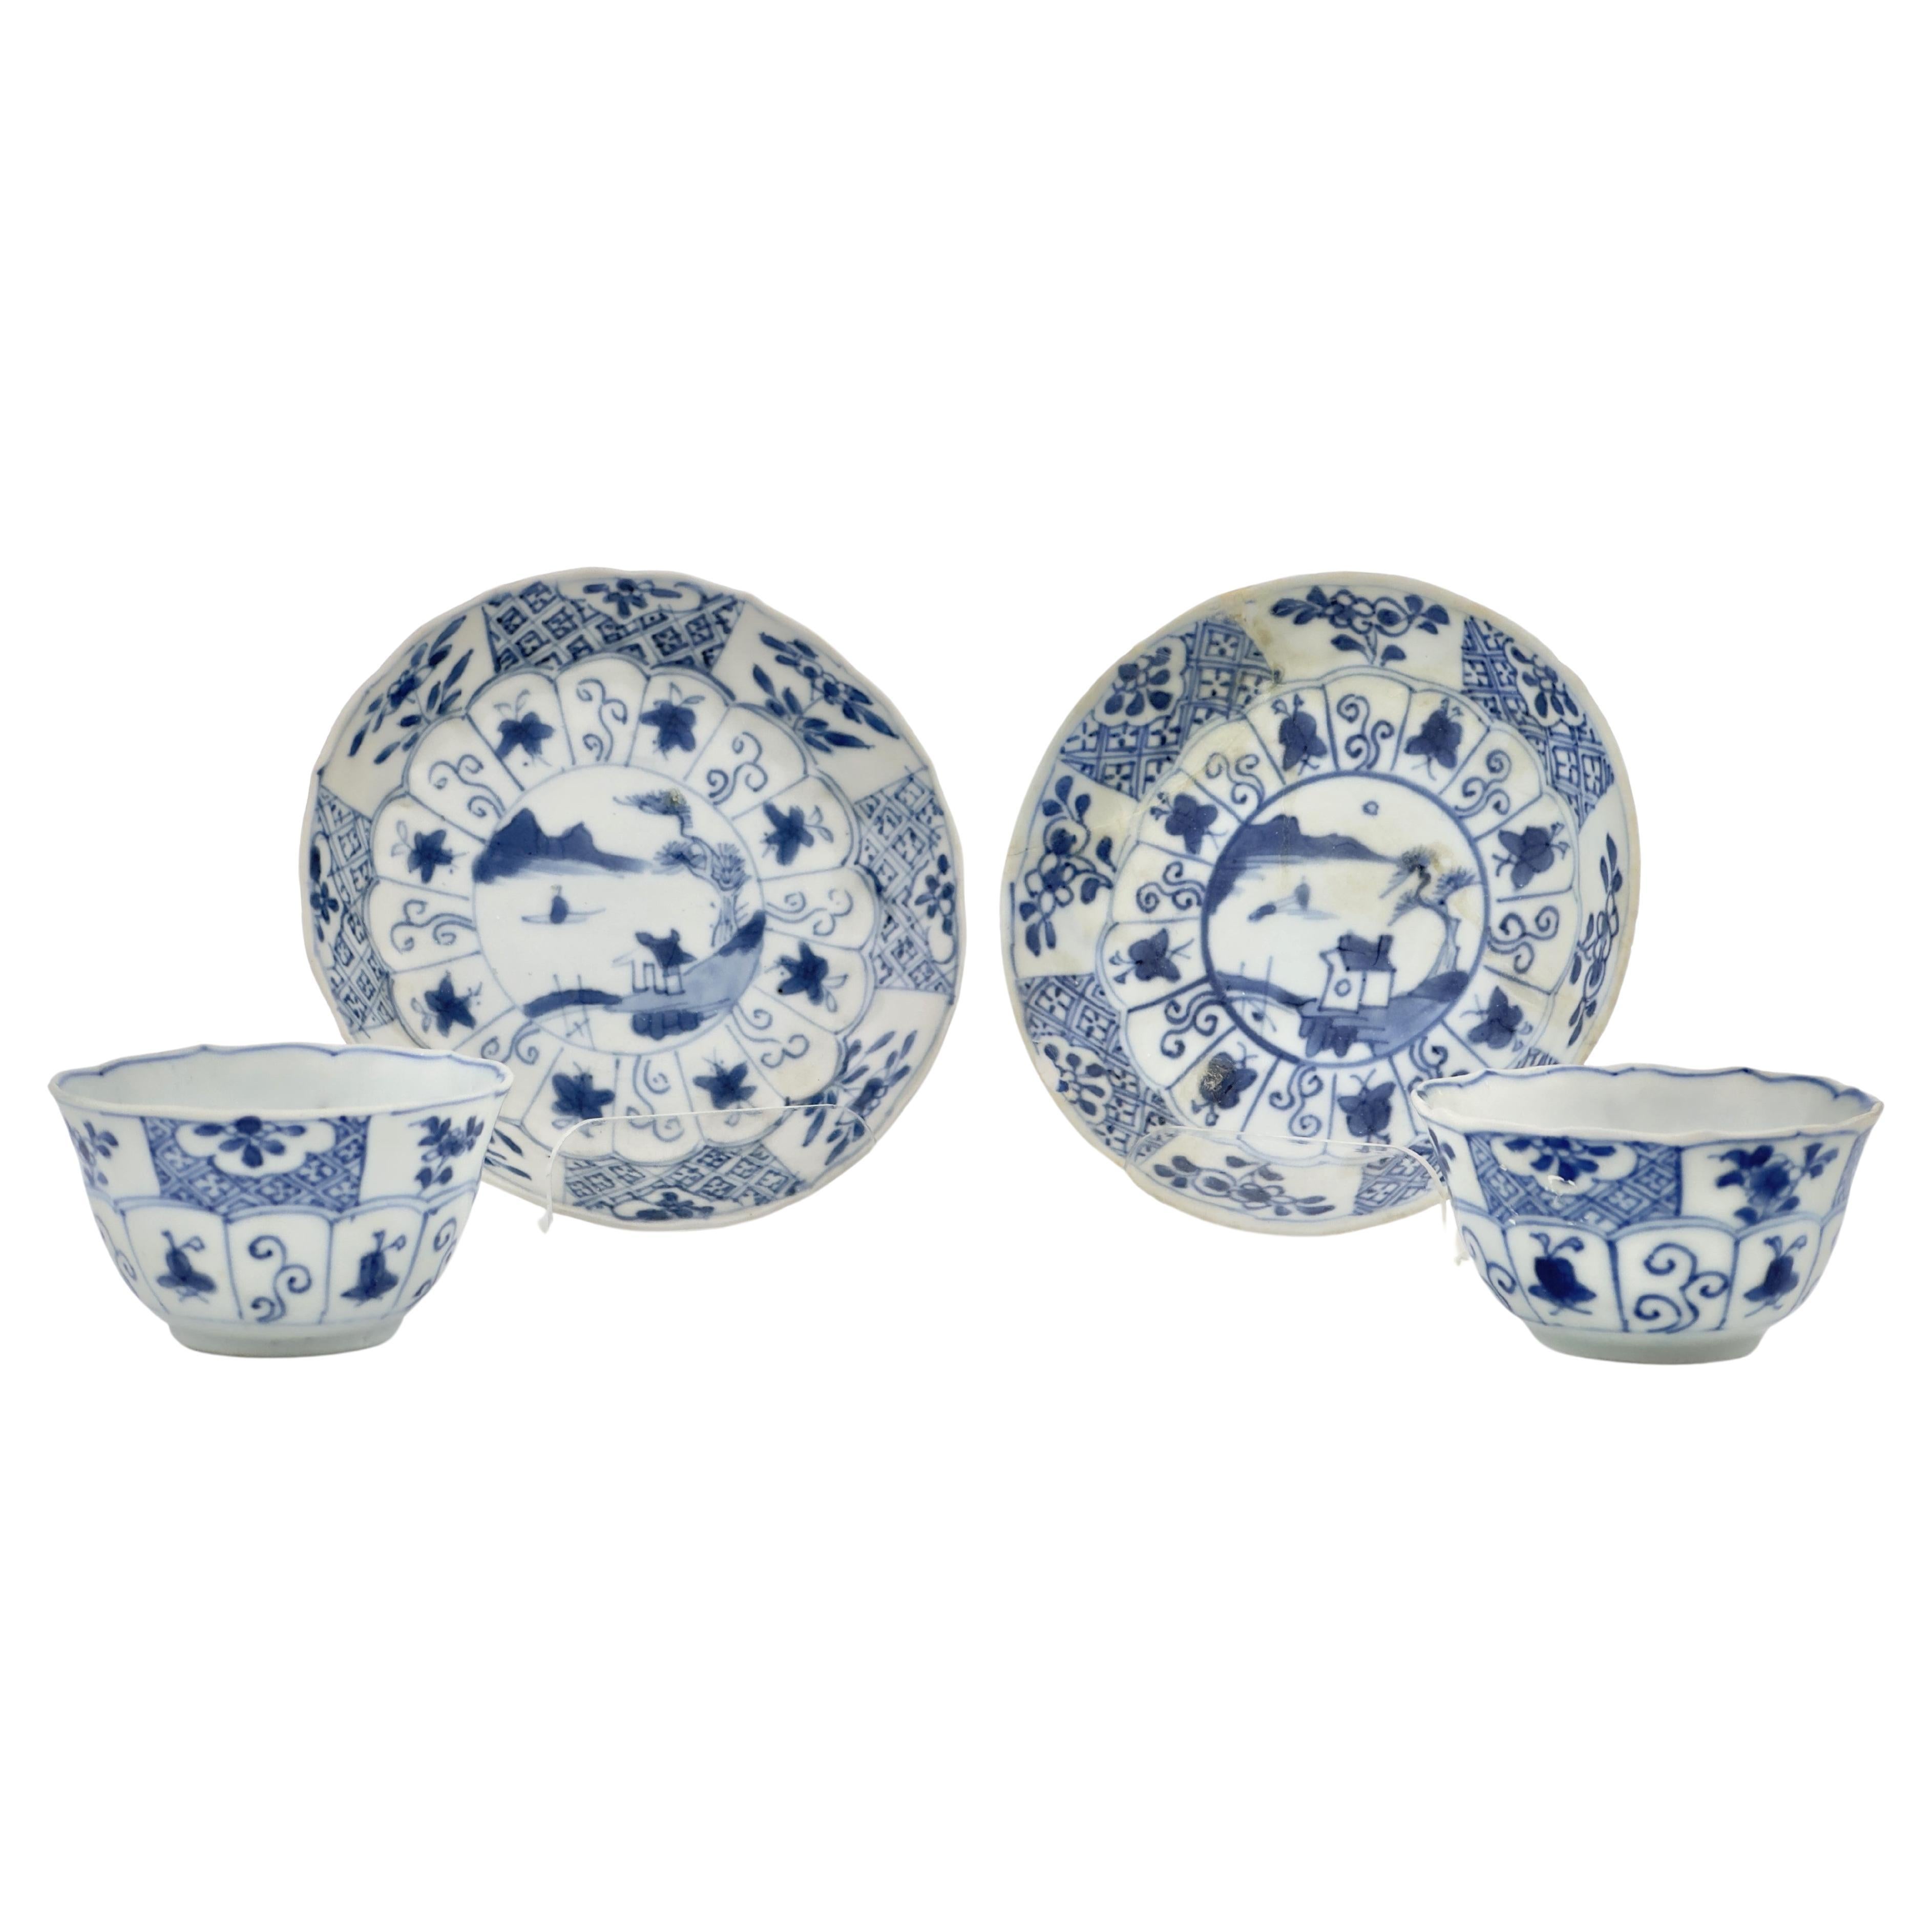 Blue and white tea set c 1725, Qing dynasty, Yongzheng reign For Sale